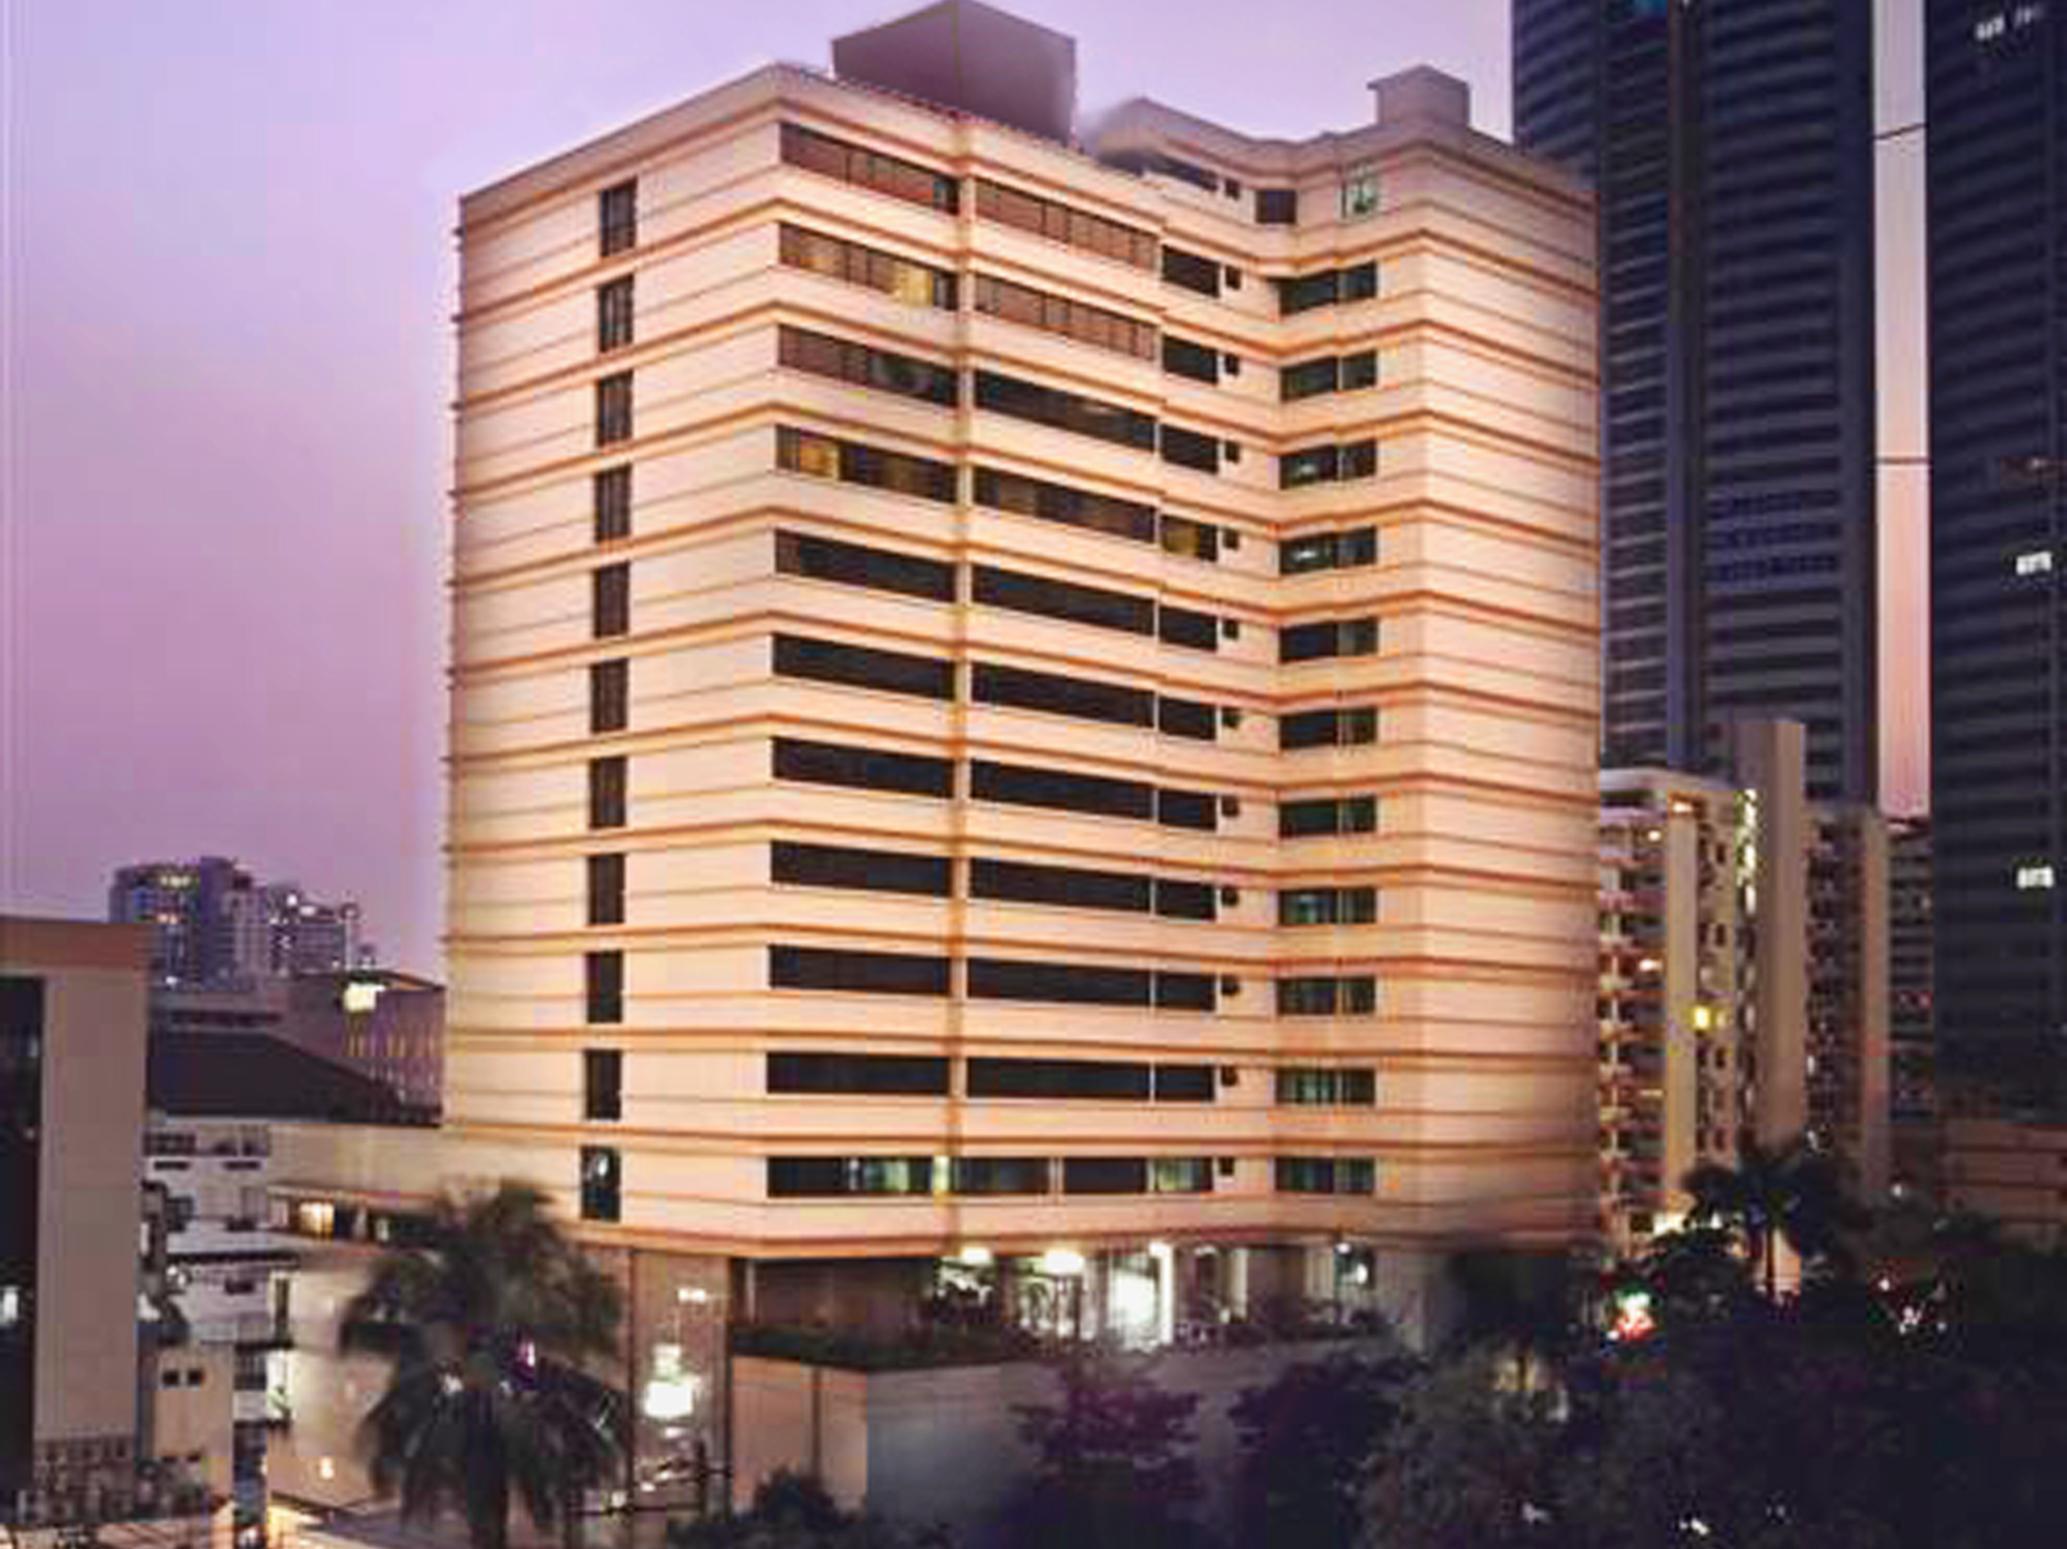 Marvel Hotel Bangkok Thailand FAQ 2016, What facilities are there in Marvel Hotel Bangkok Thailand 2016, What Languages Spoken are Supported in Marvel Hotel Bangkok Thailand 2016, Which payment cards are accepted in Marvel Hotel Bangkok Thailand , Thailand Marvel Hotel Bangkok room facilities and services Q&A 2016, Thailand Marvel Hotel Bangkok online booking services 2016, Thailand Marvel Hotel Bangkok address 2016, Thailand Marvel Hotel Bangkok telephone number 2016,Thailand Marvel Hotel Bangkok map 2016, Thailand Marvel Hotel Bangkok traffic guide 2016, how to go Thailand Marvel Hotel Bangkok, Thailand Marvel Hotel Bangkok booking online 2016, Thailand Marvel Hotel Bangkok room types 2016.